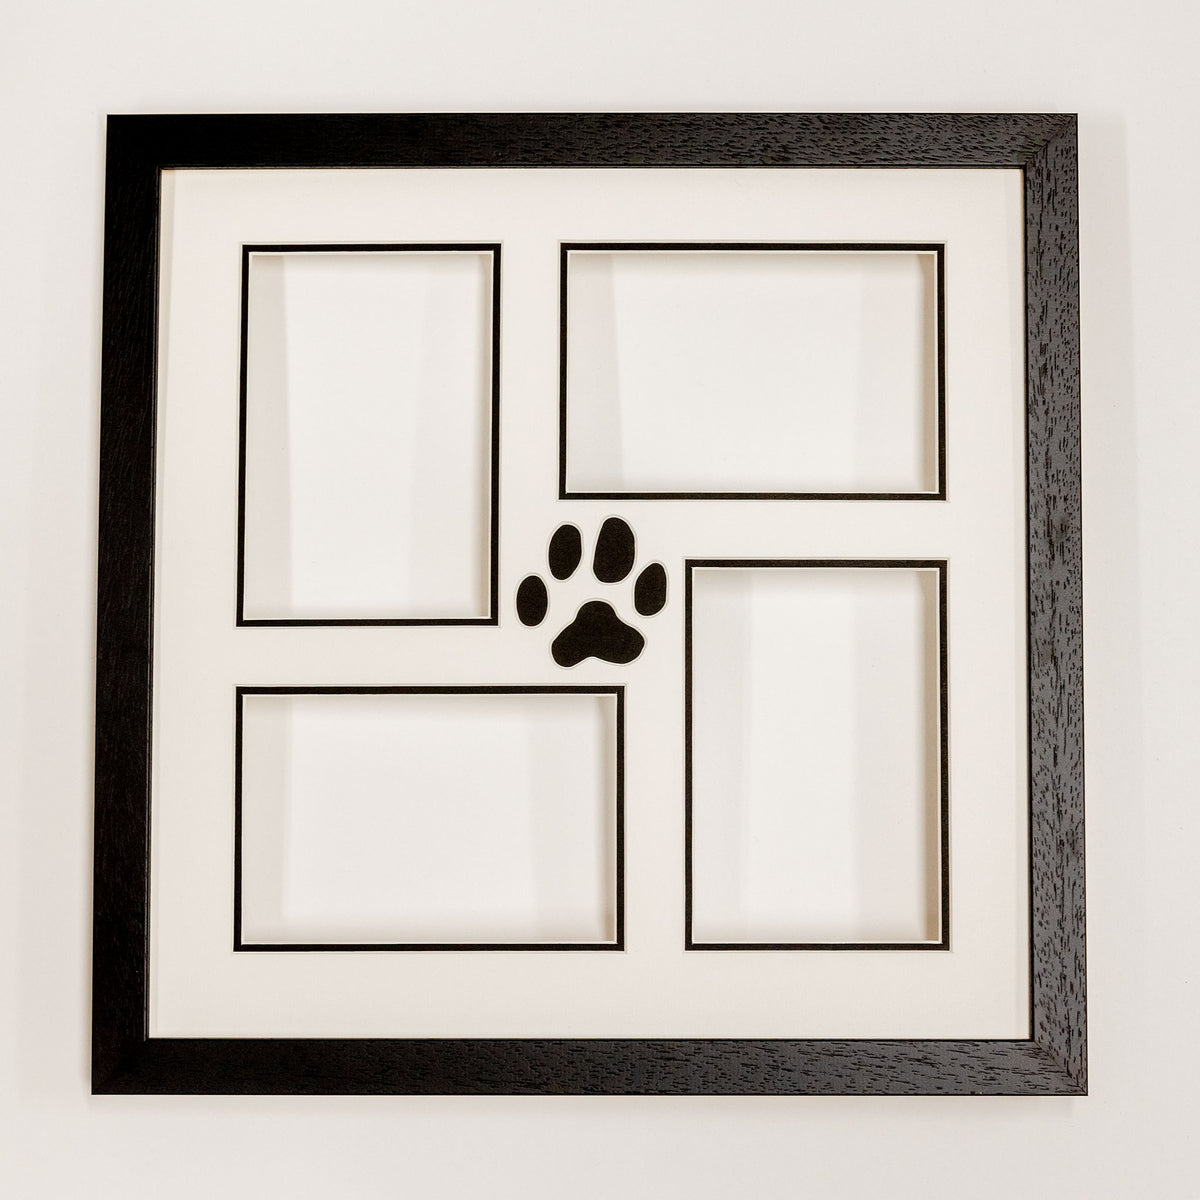 Phoenix Black 14 x 14inch Paw Print Picture Frame with Glass (4 - 6 x 4inch)